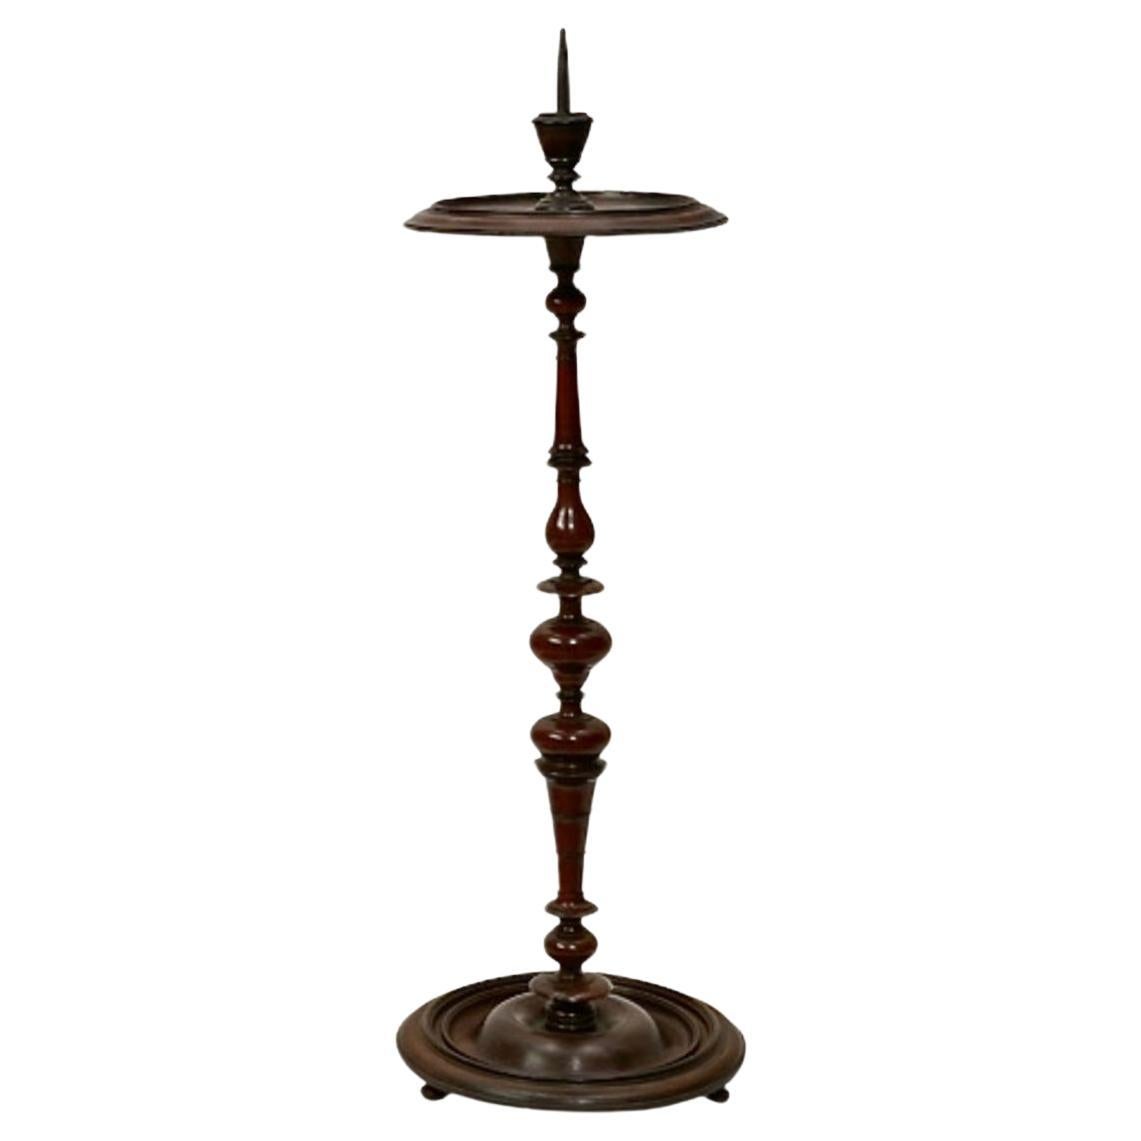 Turned Wood Tall Pricket Stick For Sale